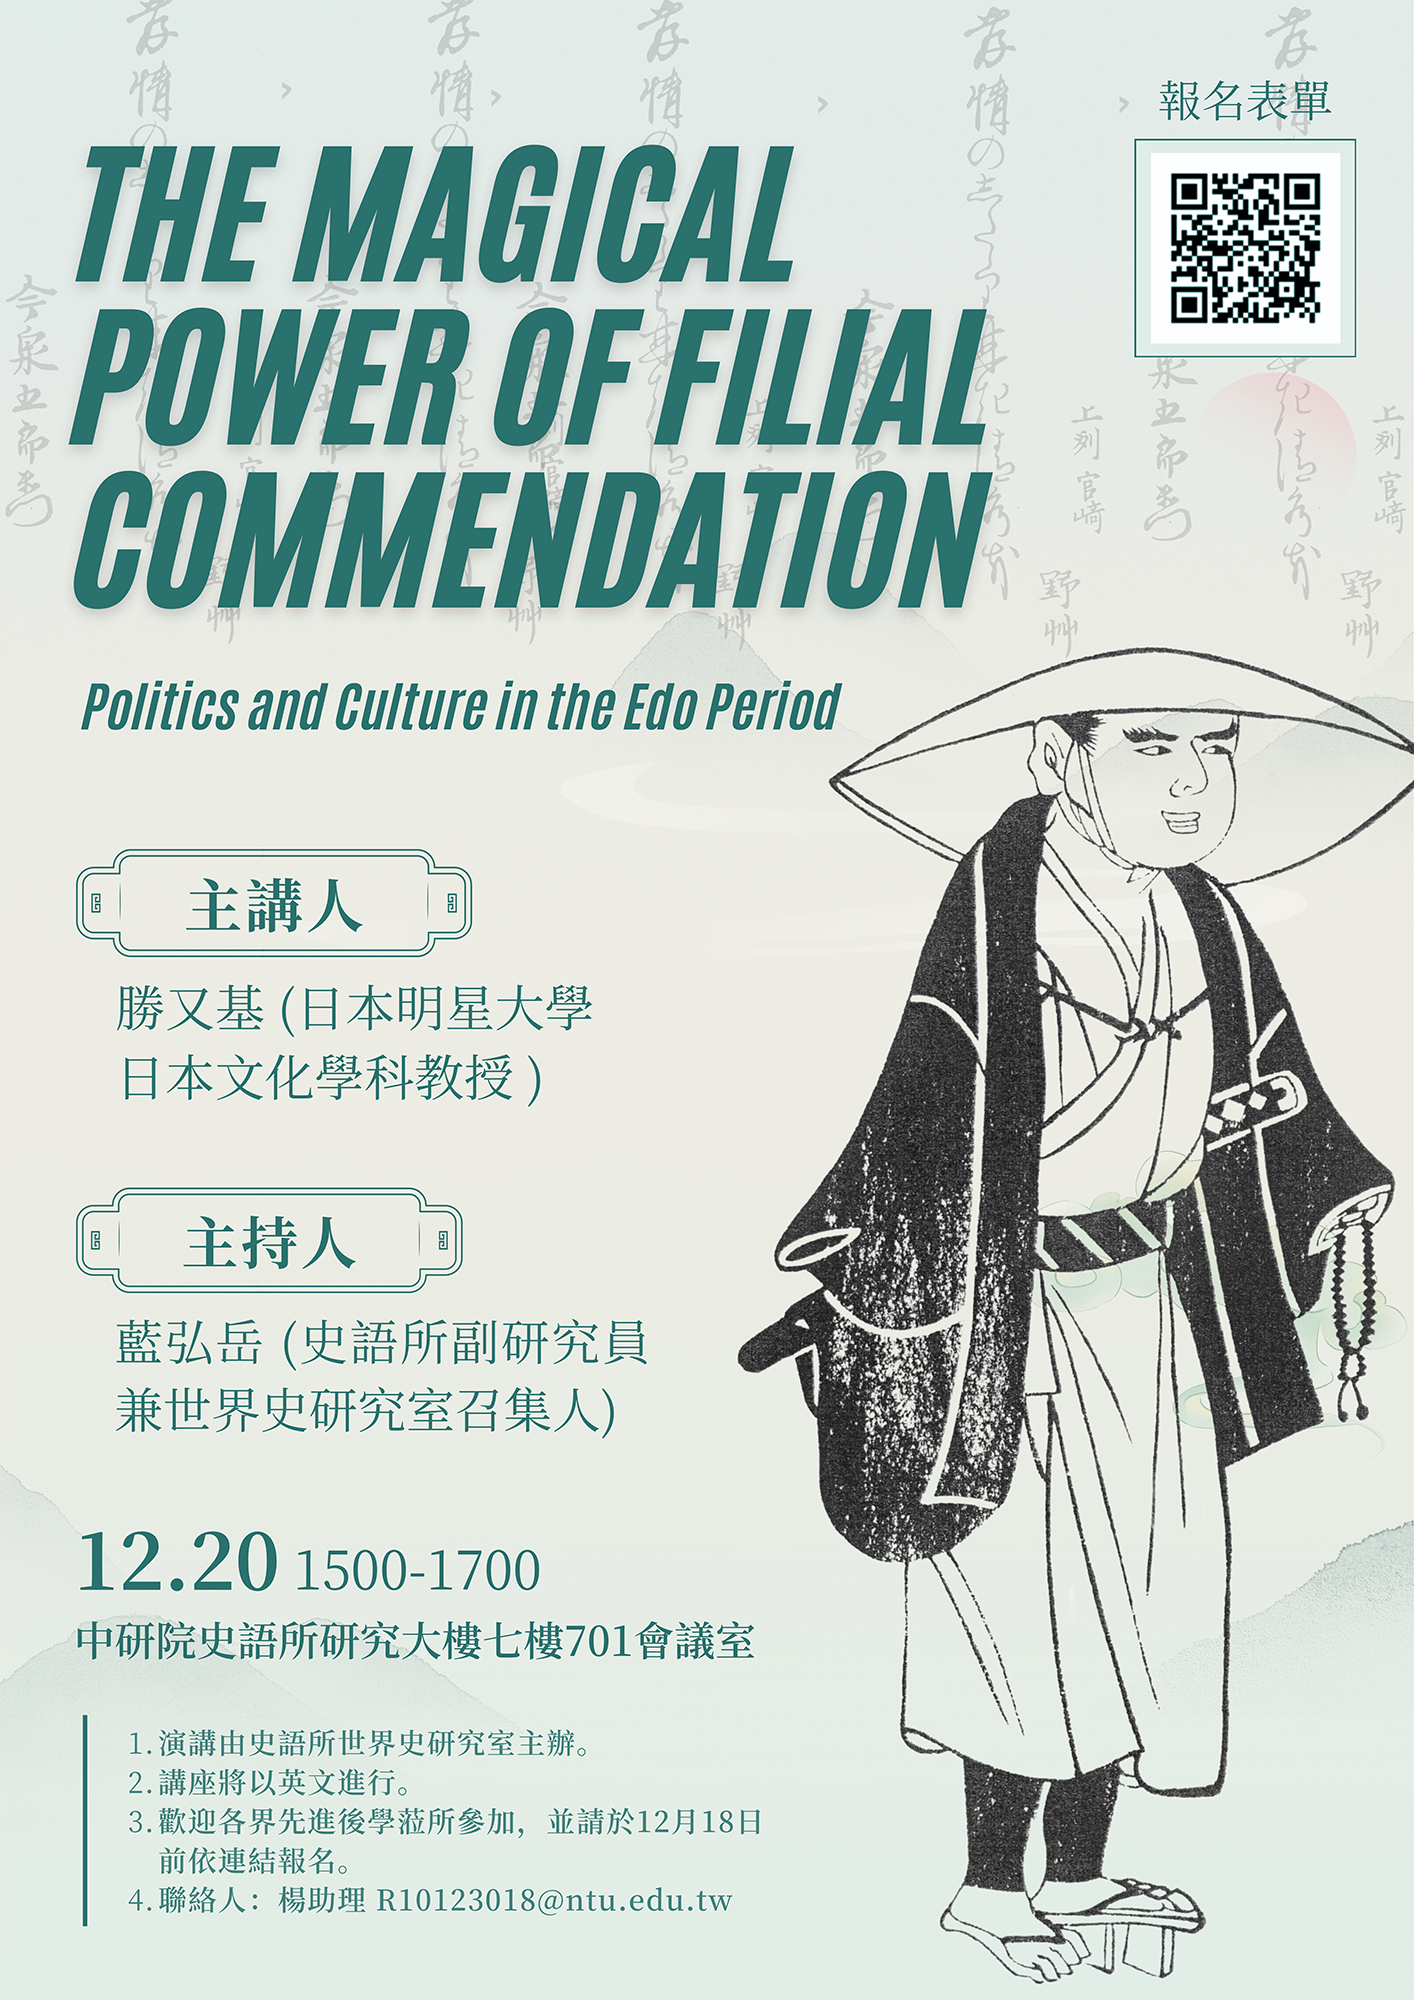 1220_The_Magical_Power_of_Filial_Commendation_Politics_and_Culture_in_the__Edo_Period.jpg